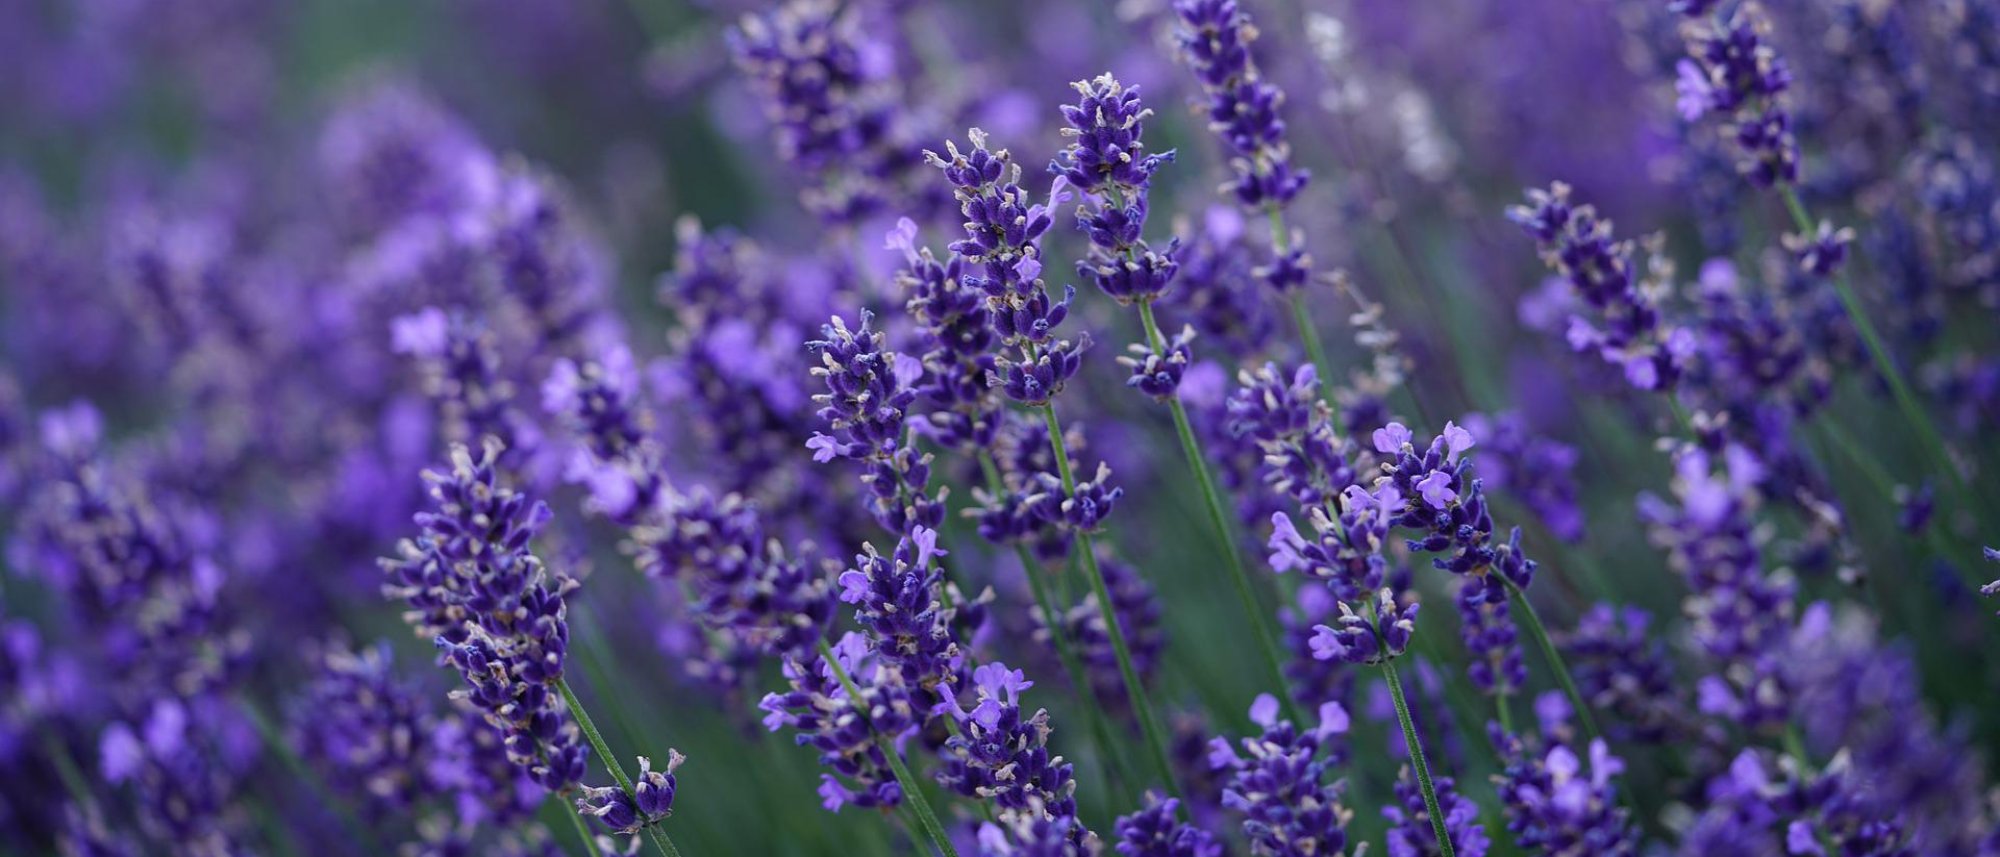 Grow lavender for home remedies